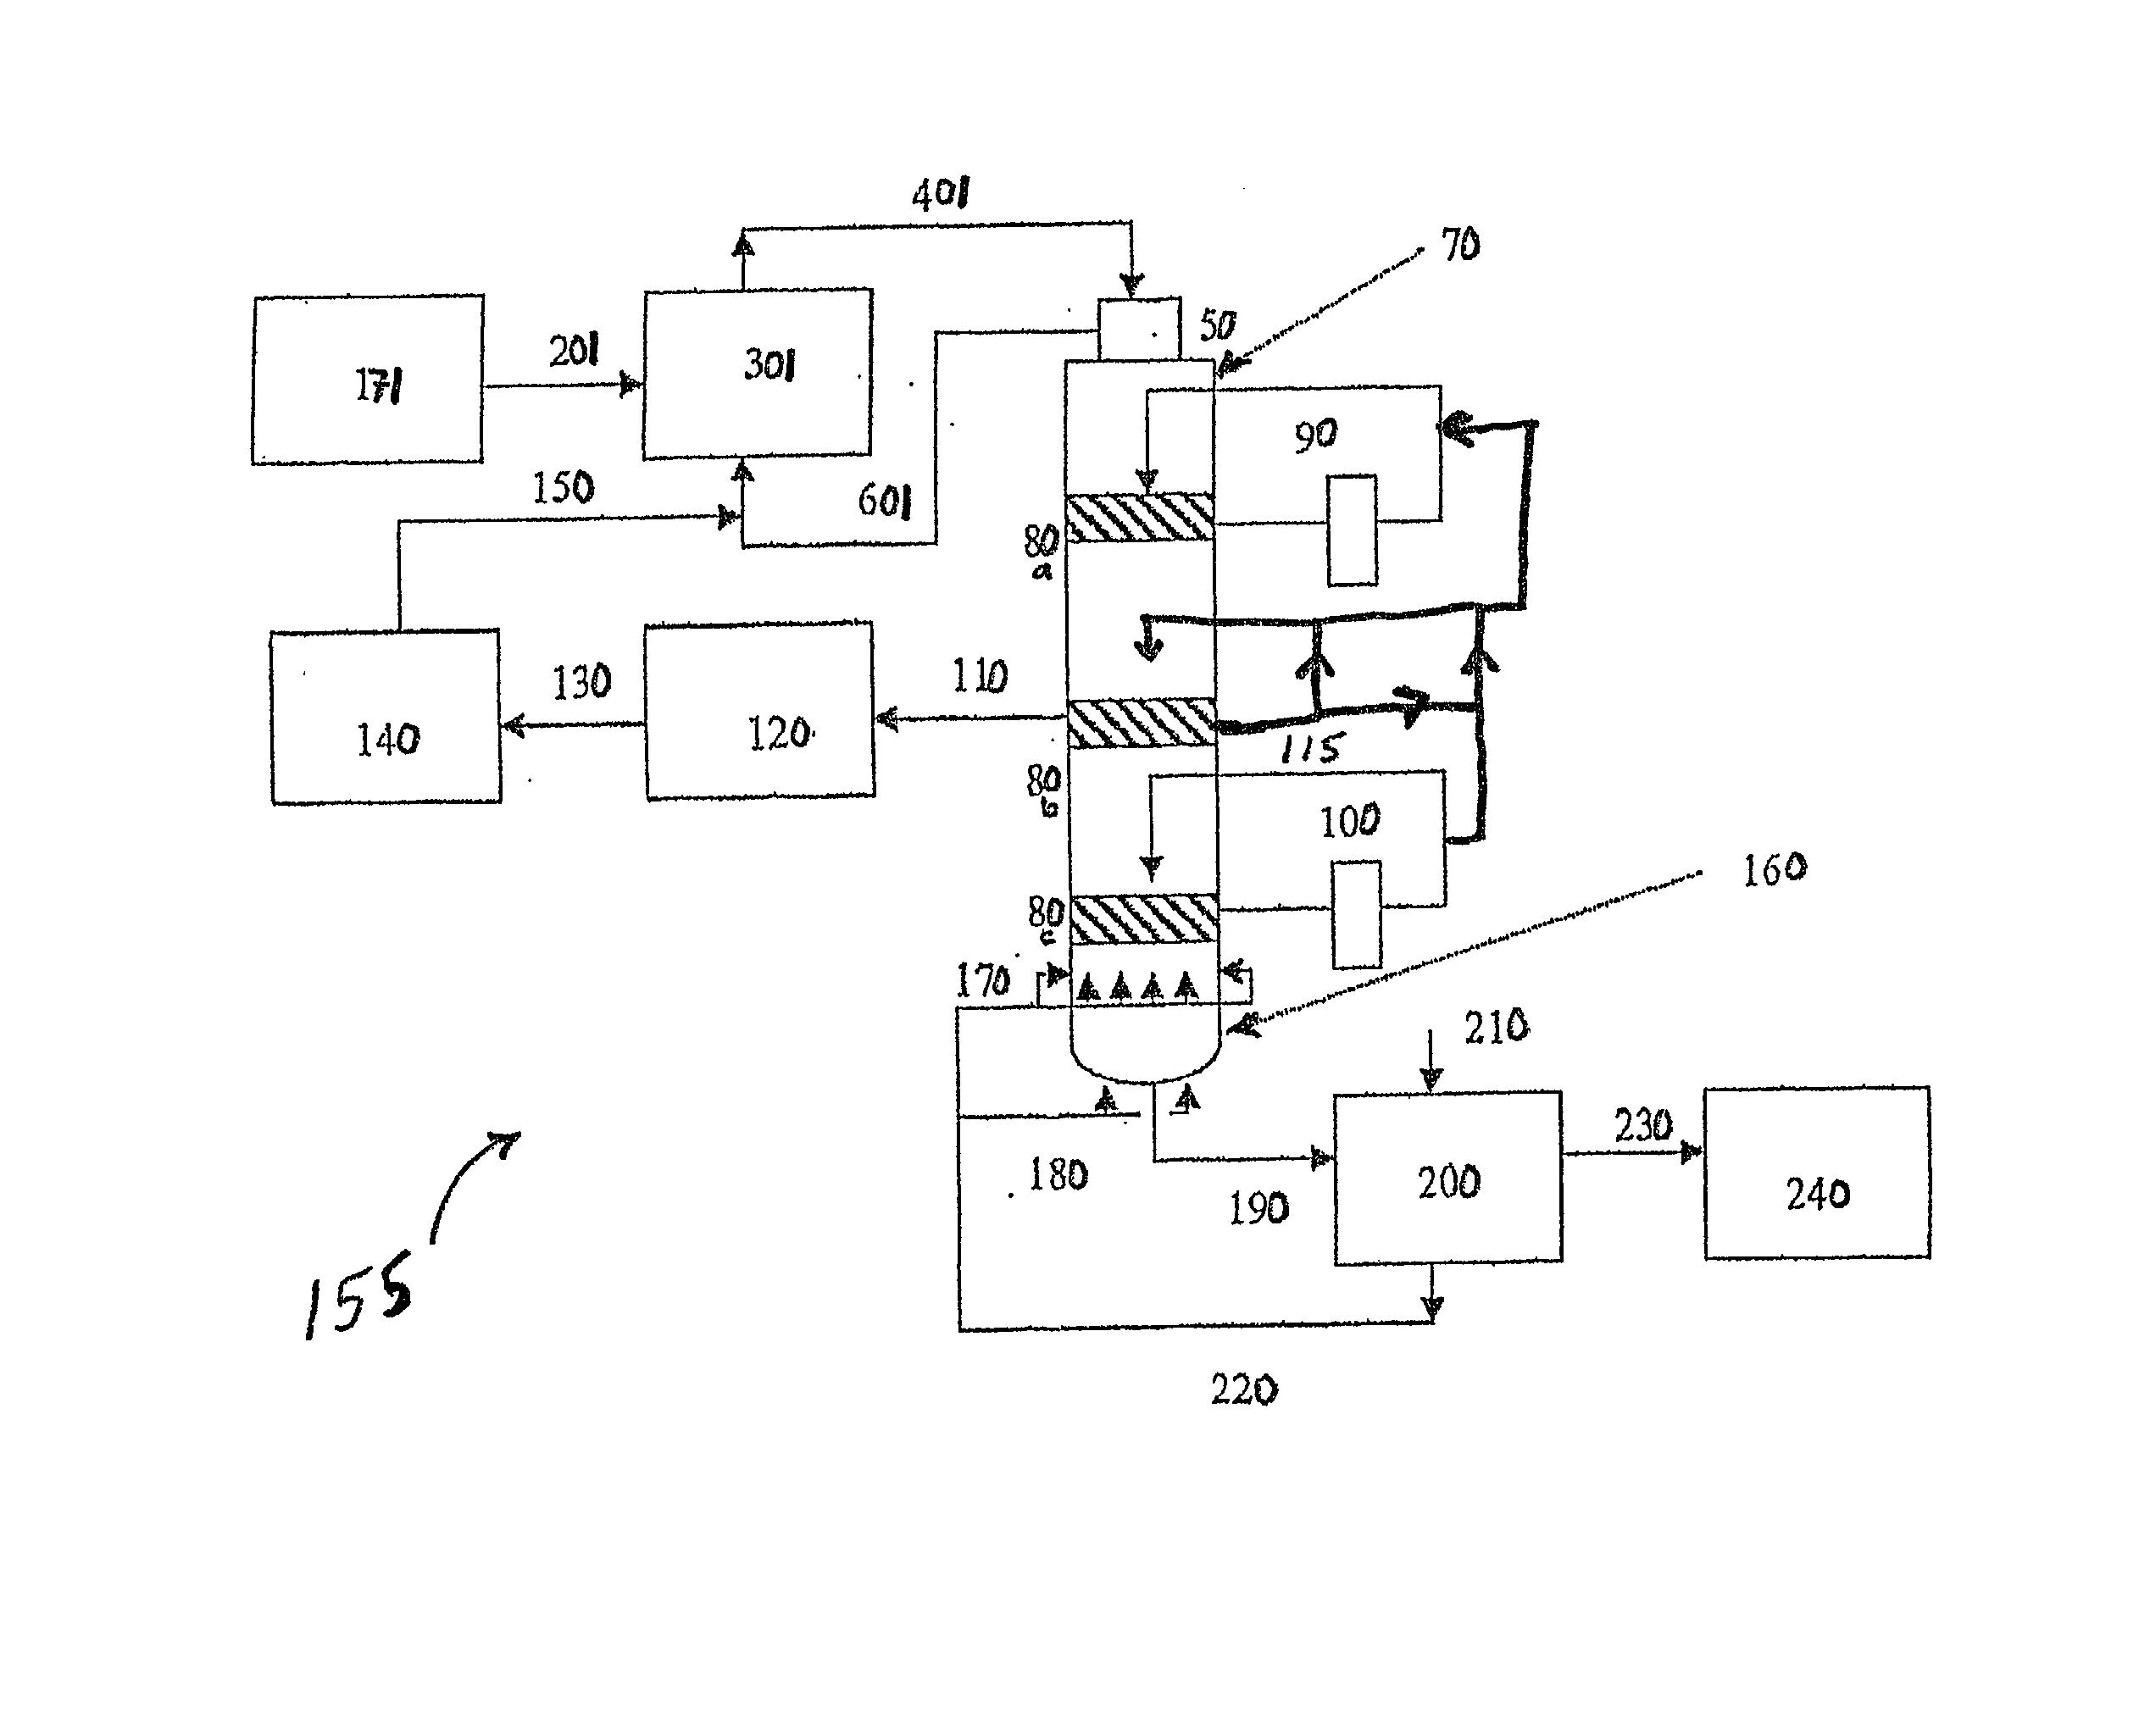 Process and configuration for providing external upflow/internal downflow in a continuous digester